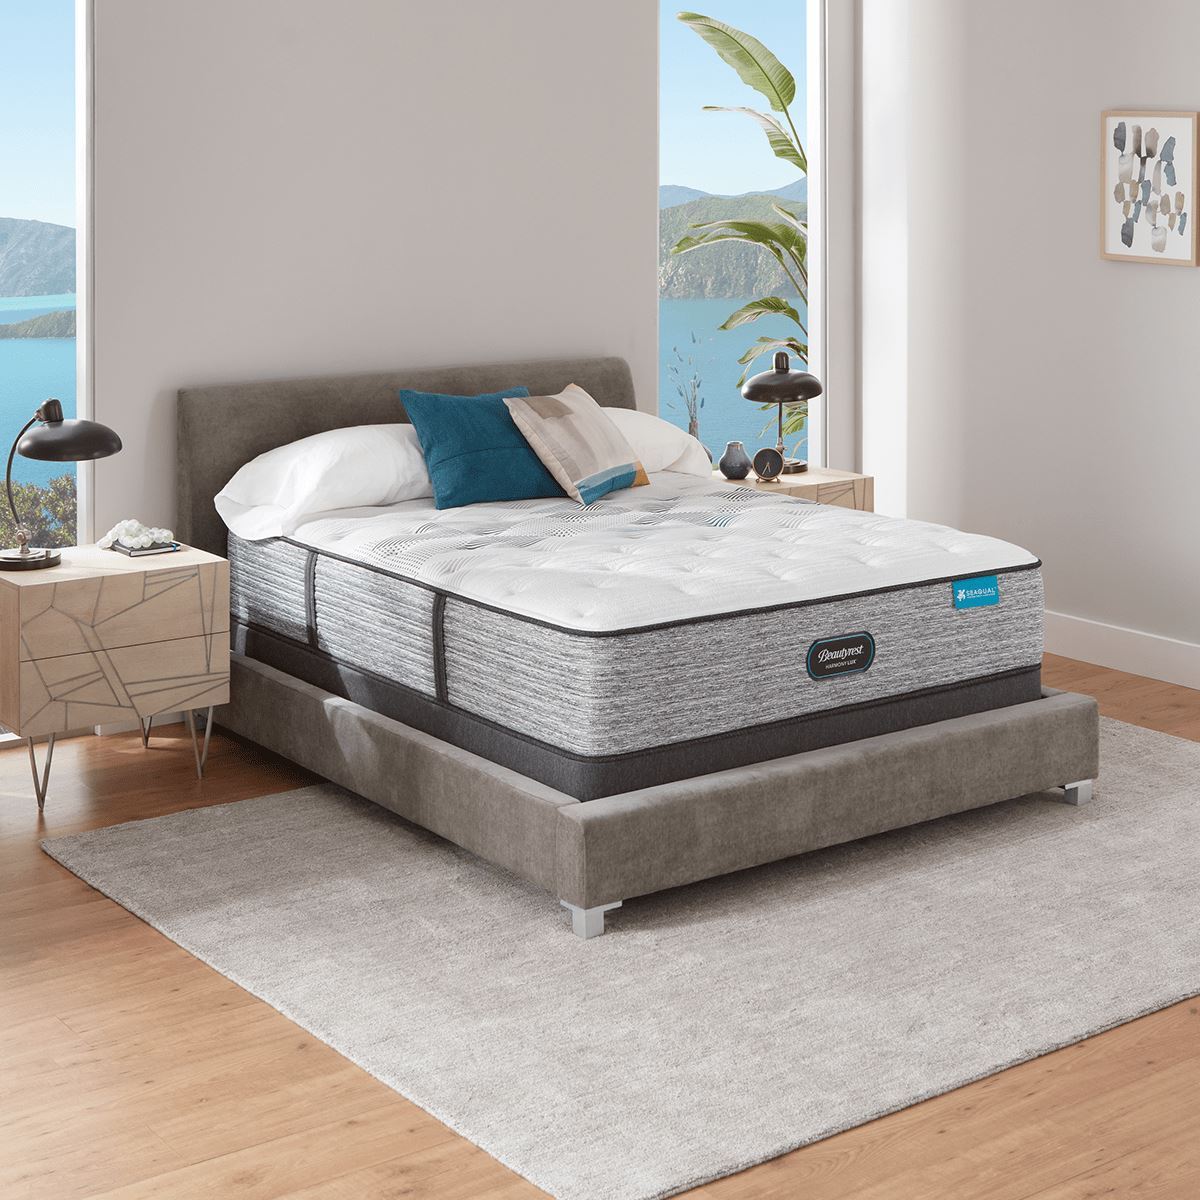 Picture of Beautyrest Harmony Lux Carbon Medium Mattress